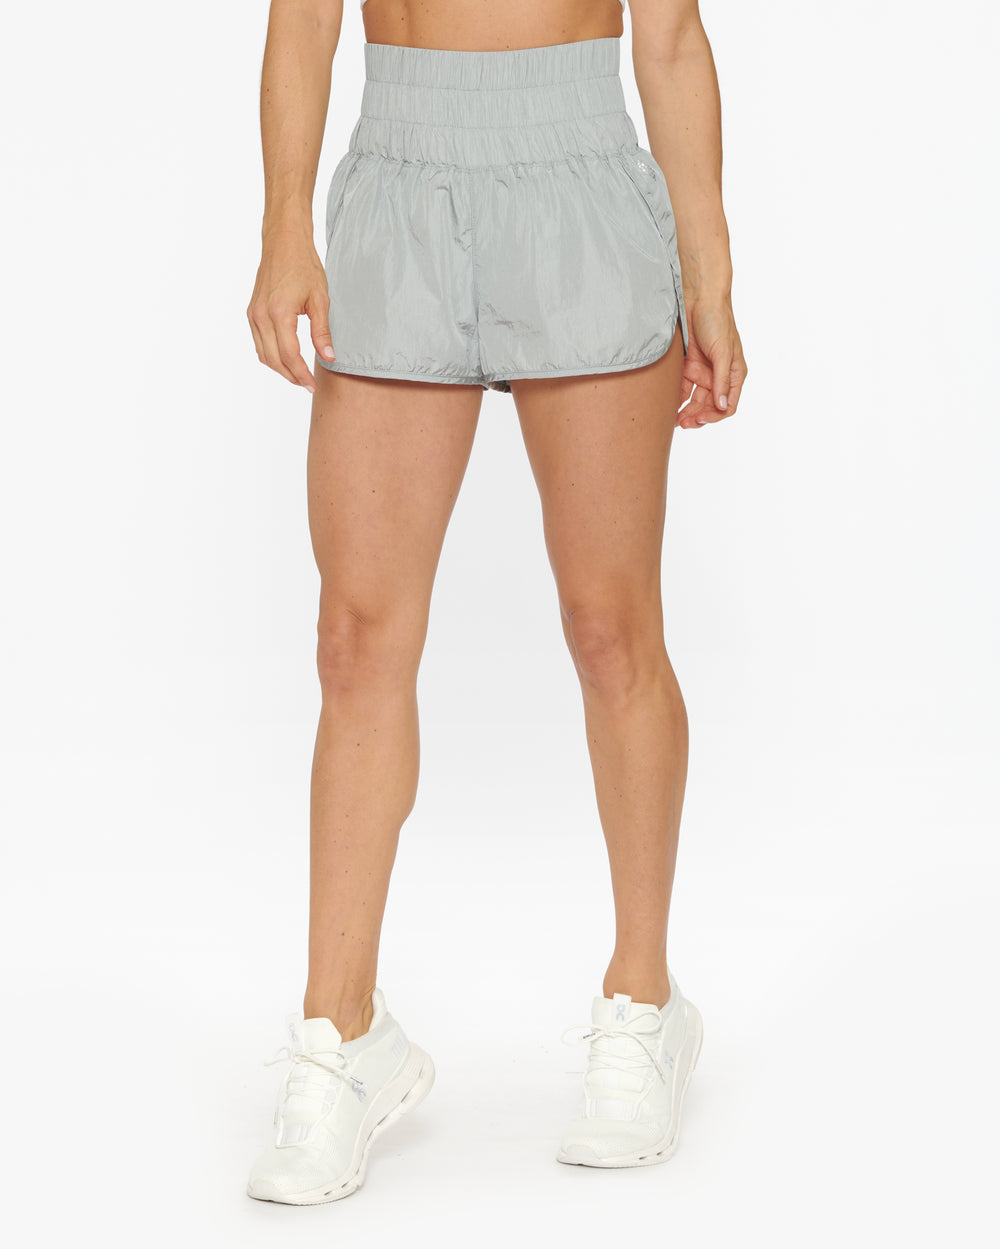 FREE PEOPLE WAY HOME SHORT